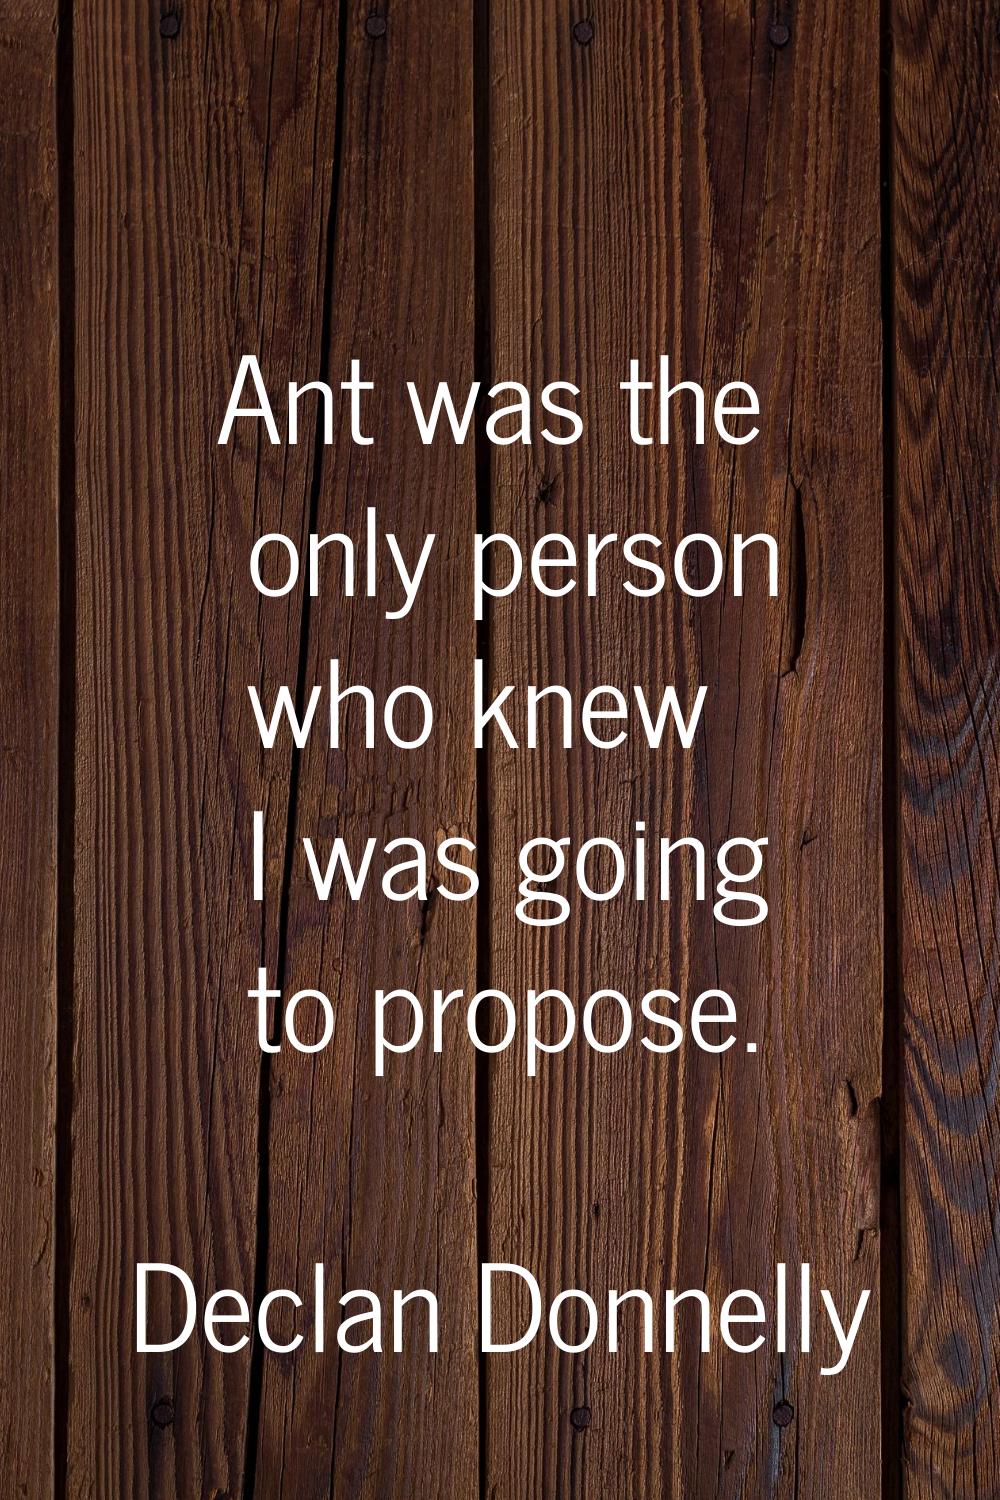 Ant was the only person who knew I was going to propose.